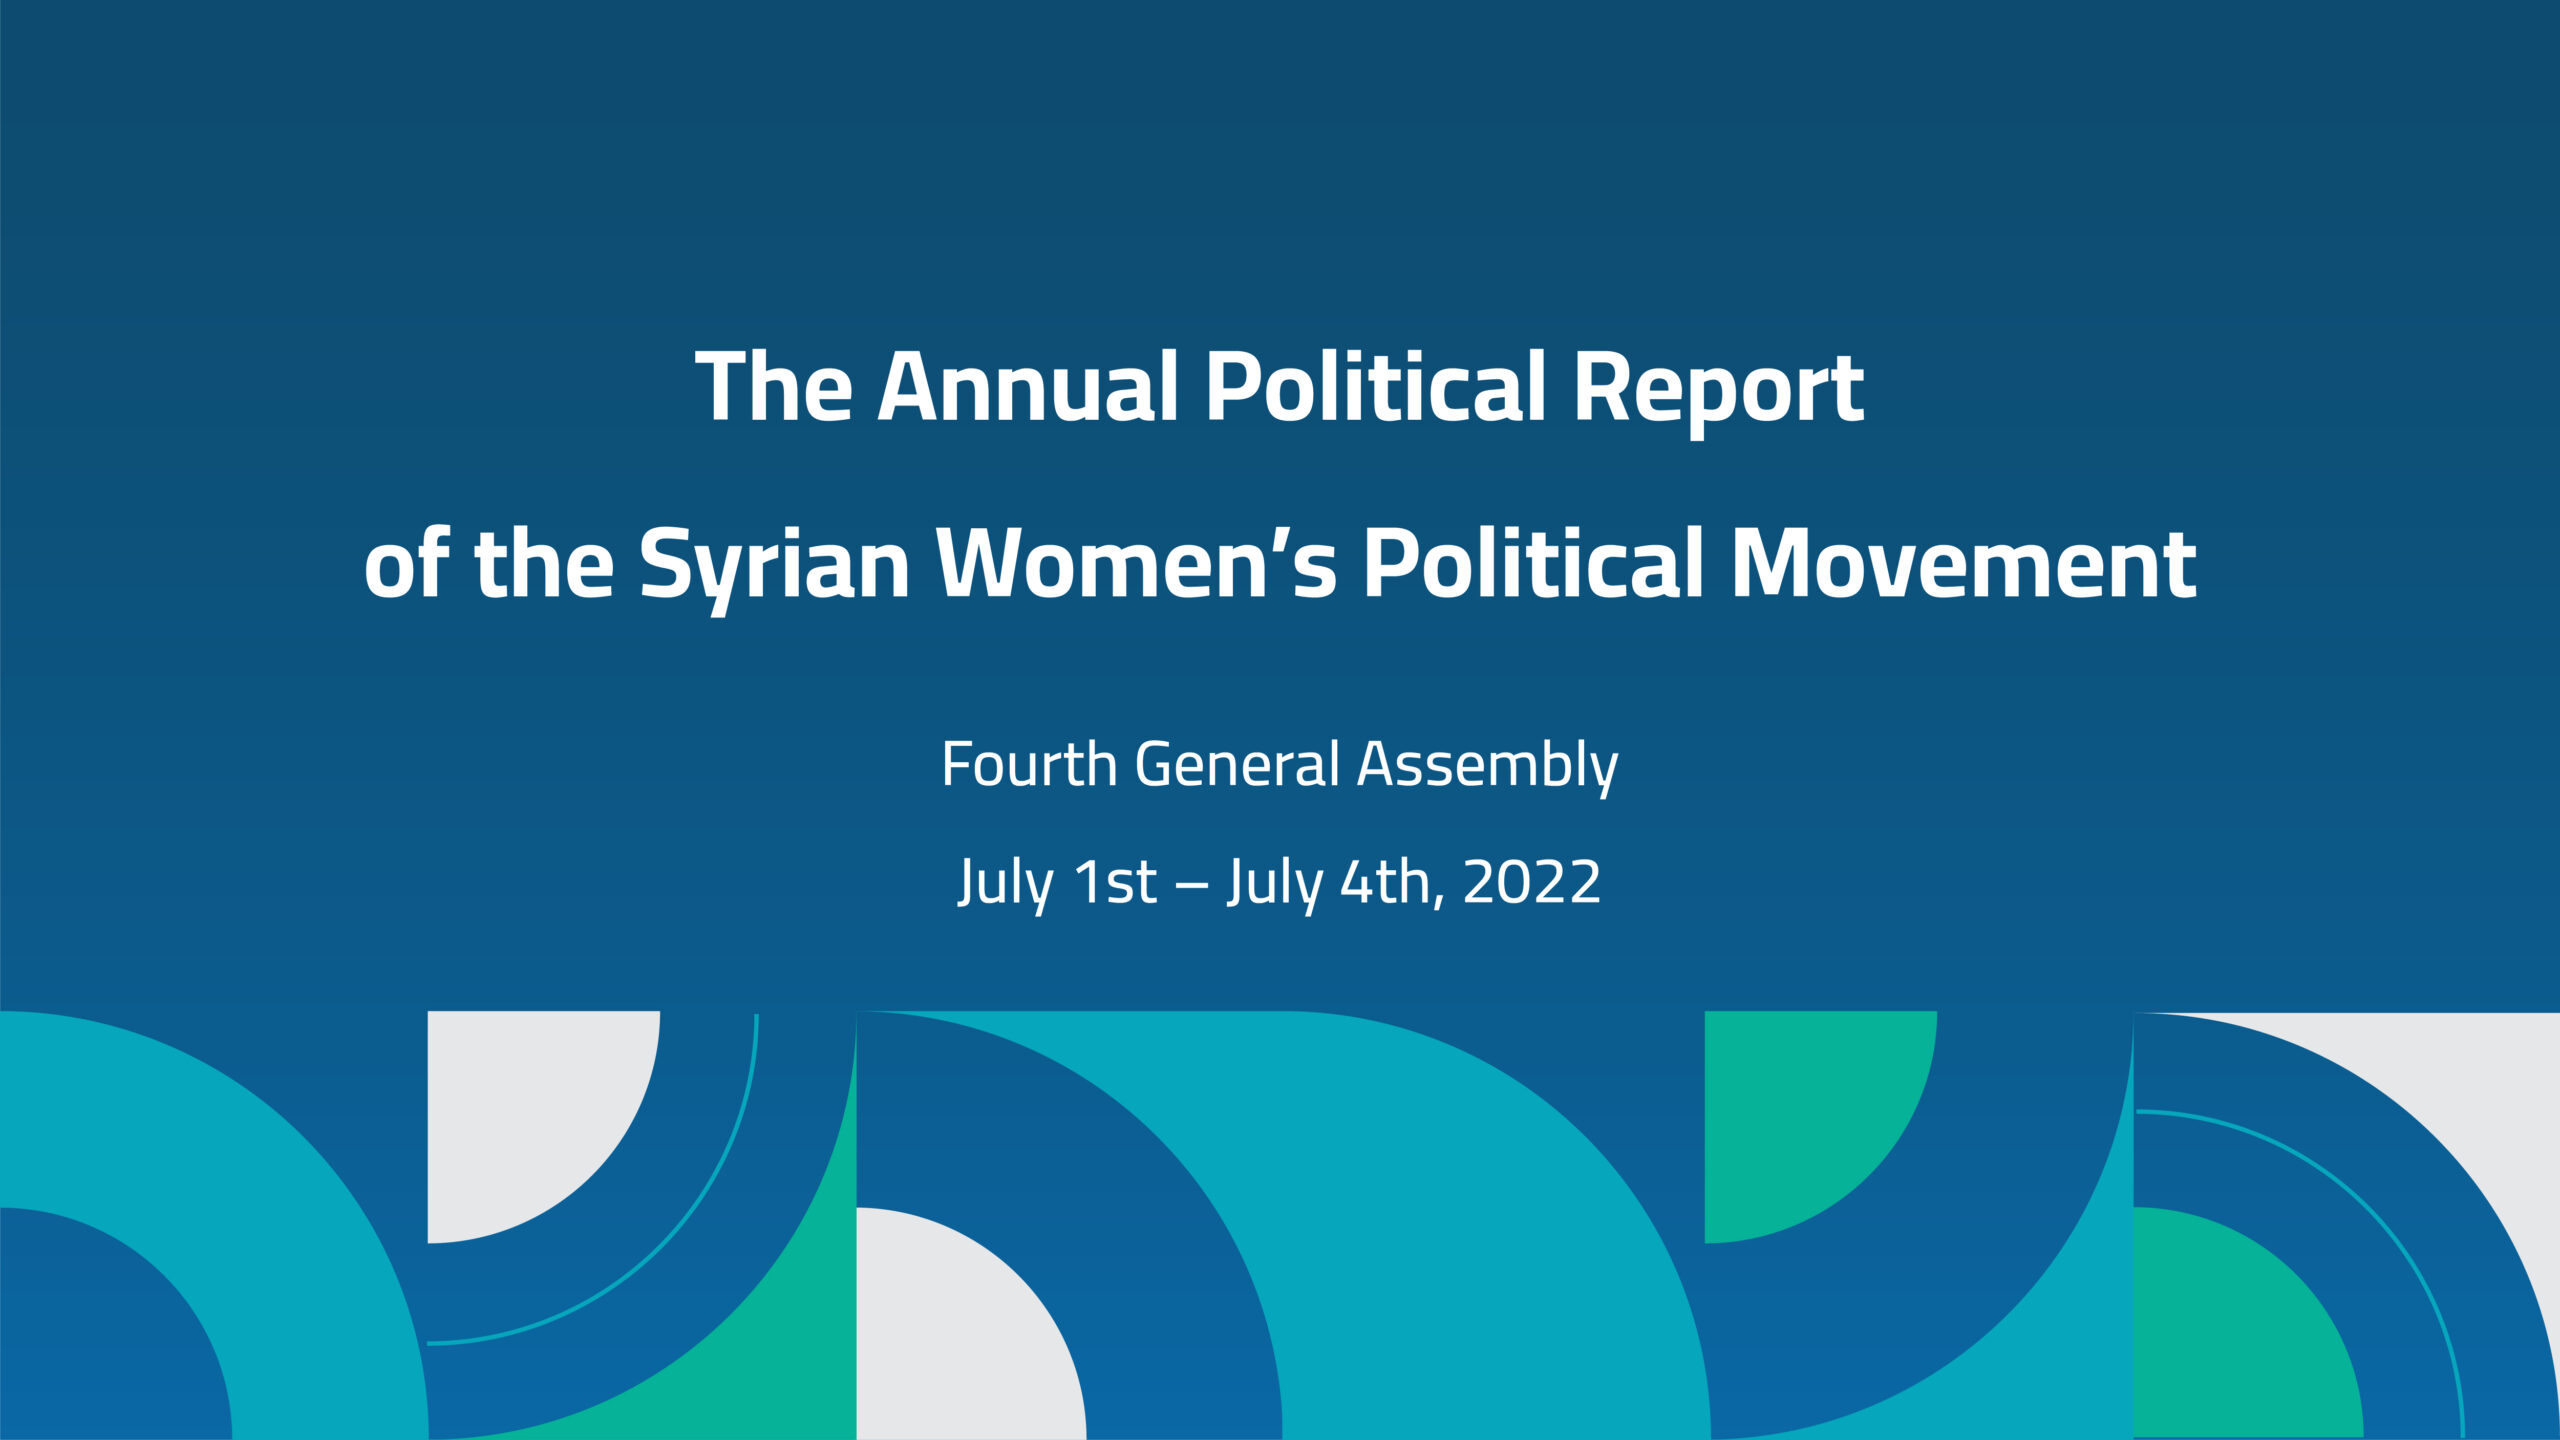 The Annual Political Report of the Syrian Women’s Political Movement 2022